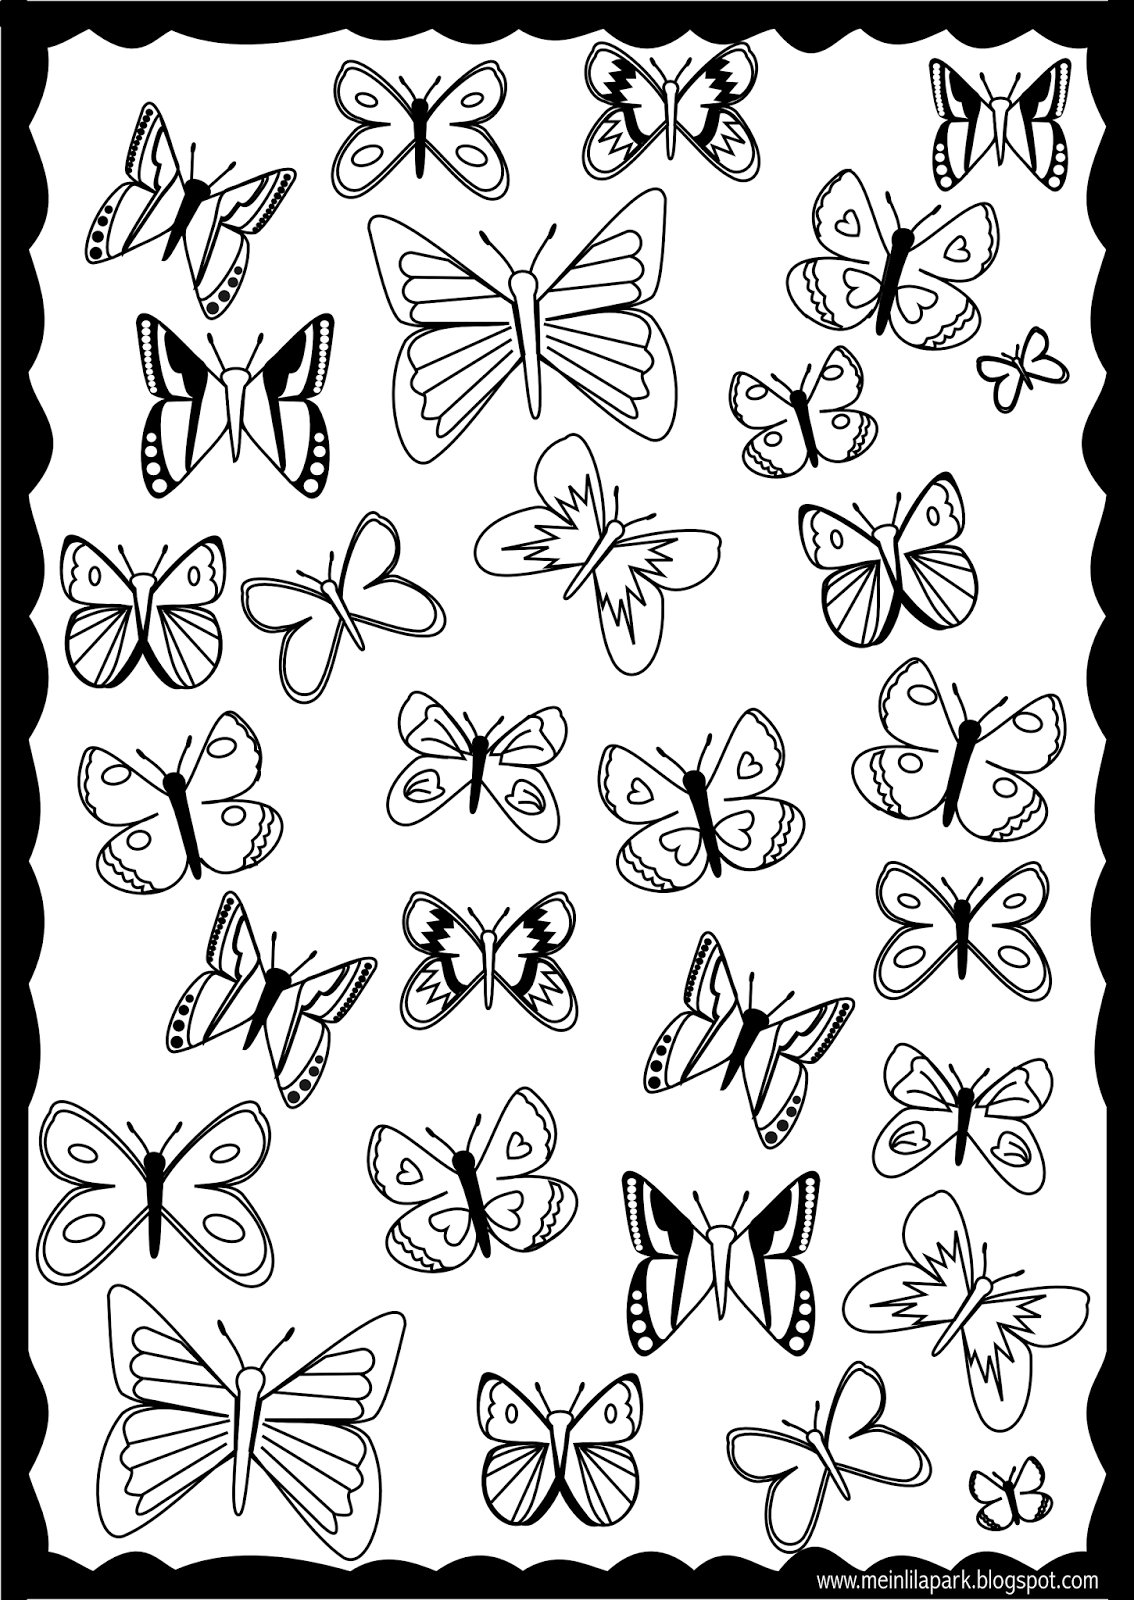 Free Printable Pictures Of Butterflies